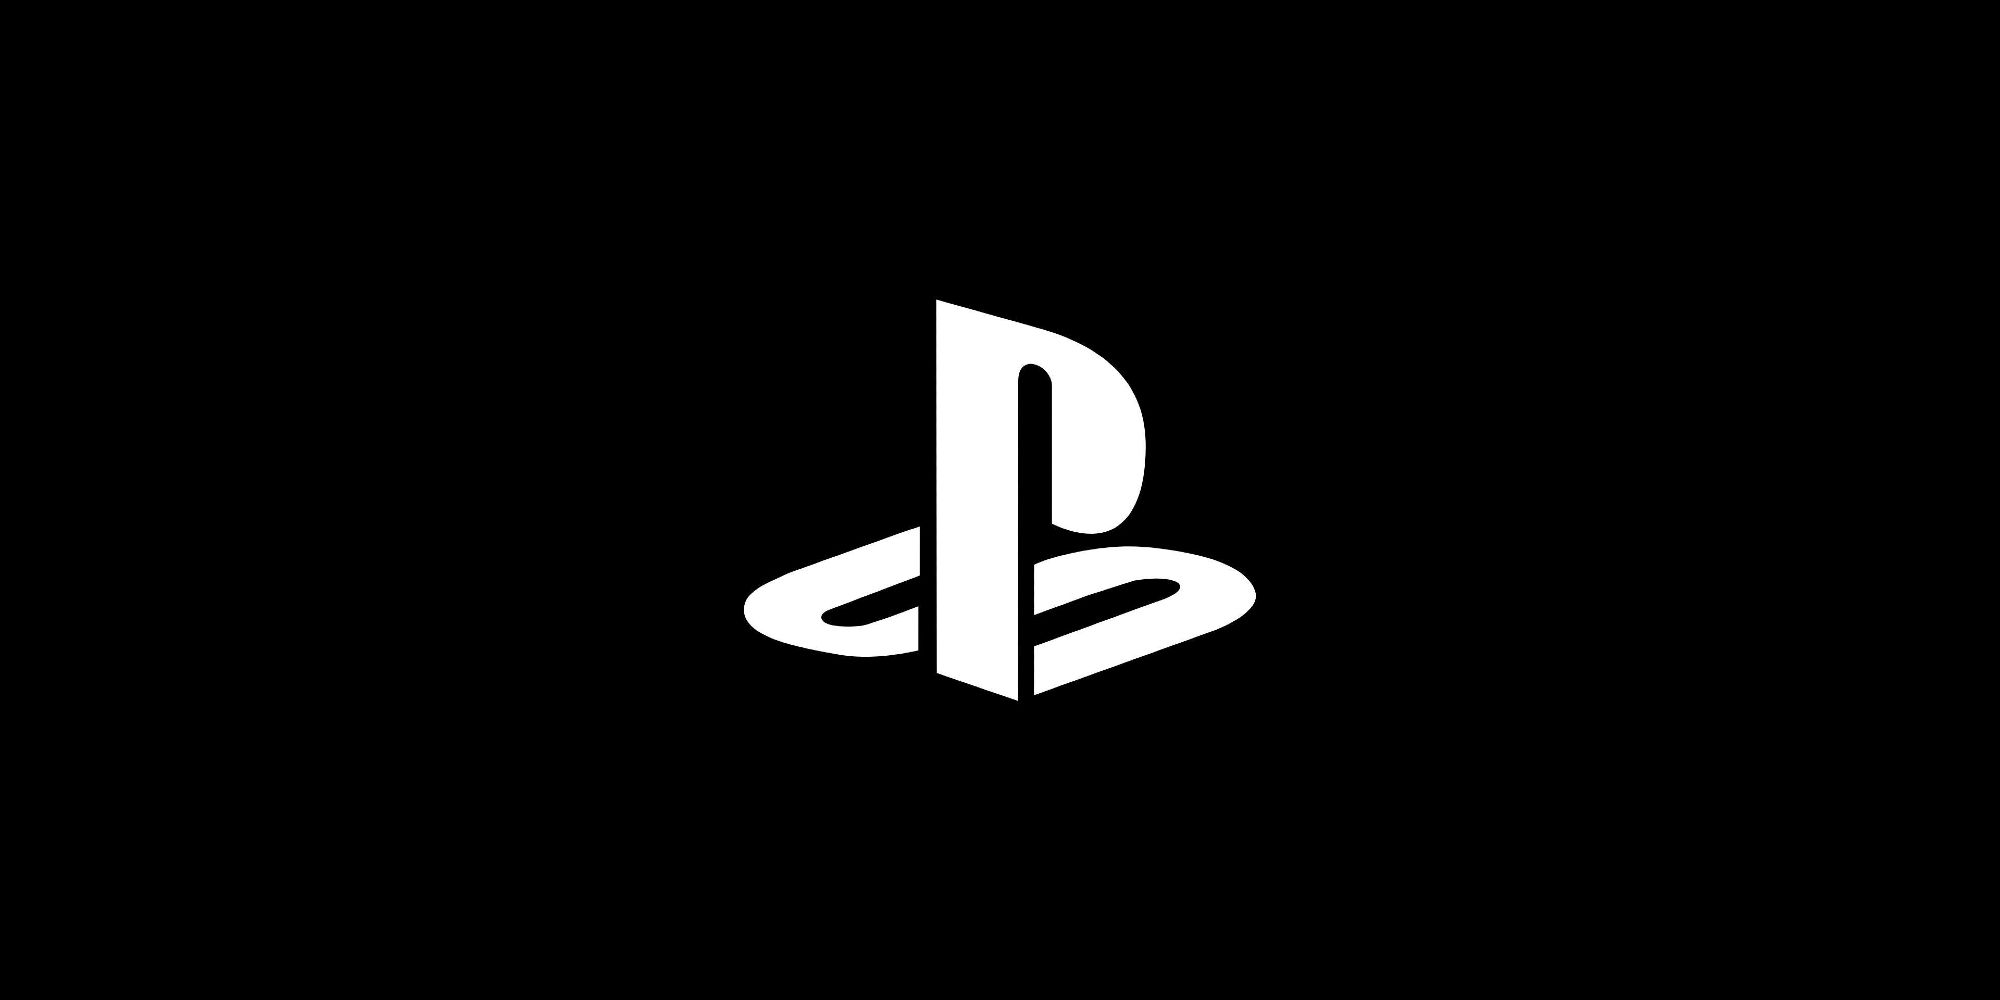 PlayStation logo with a black background